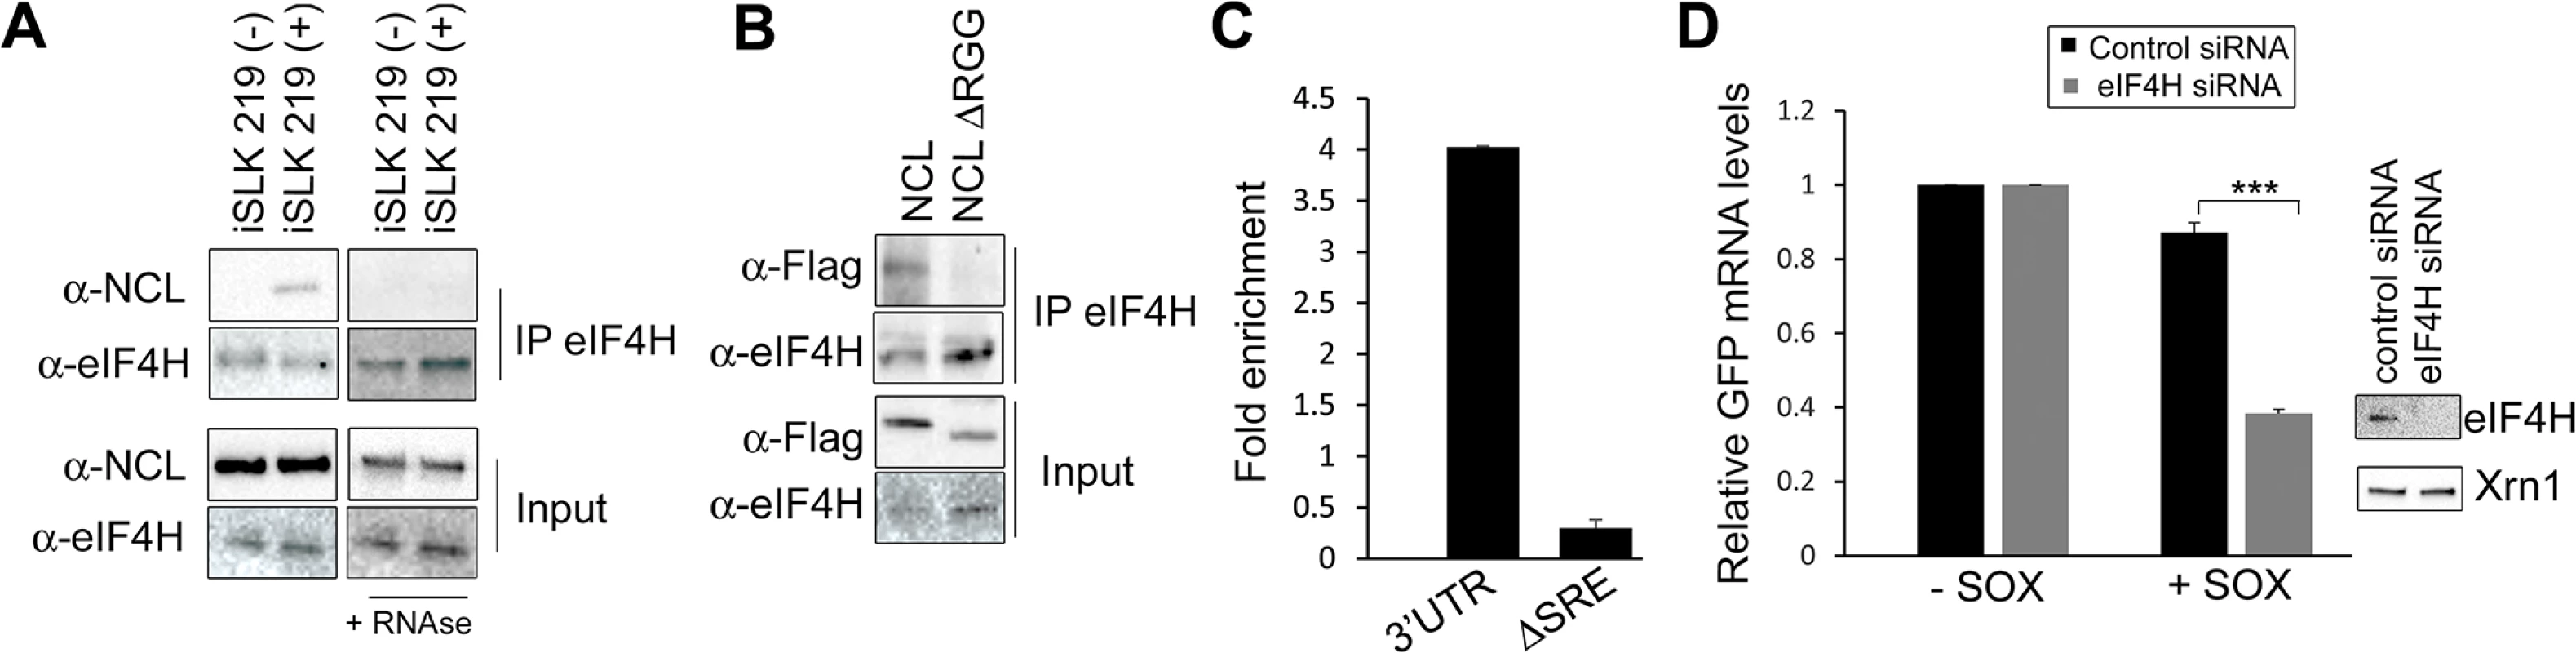 IL-6 escape is potentiated by an NCL-eIF4H interaction.